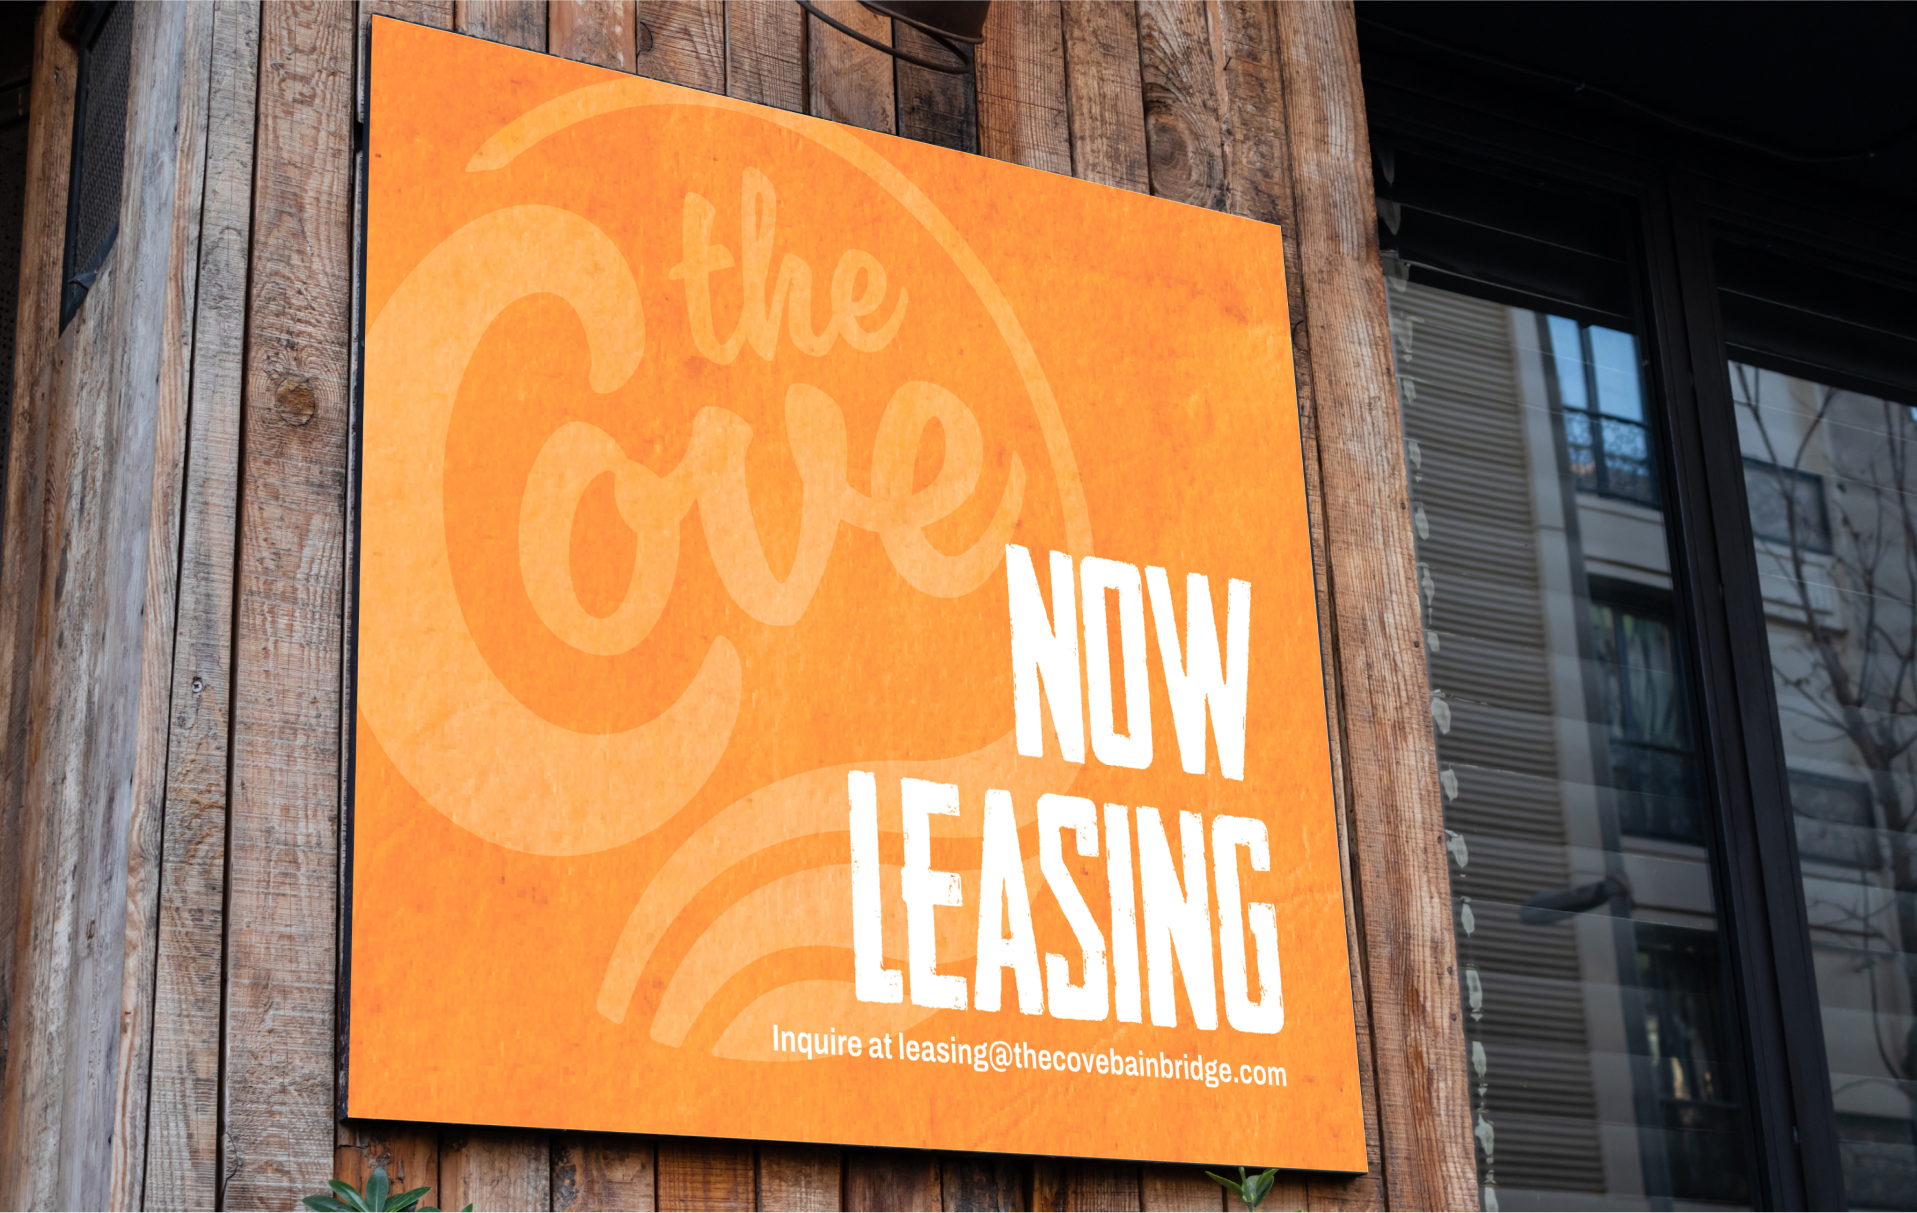 The Cove Leasing Sign